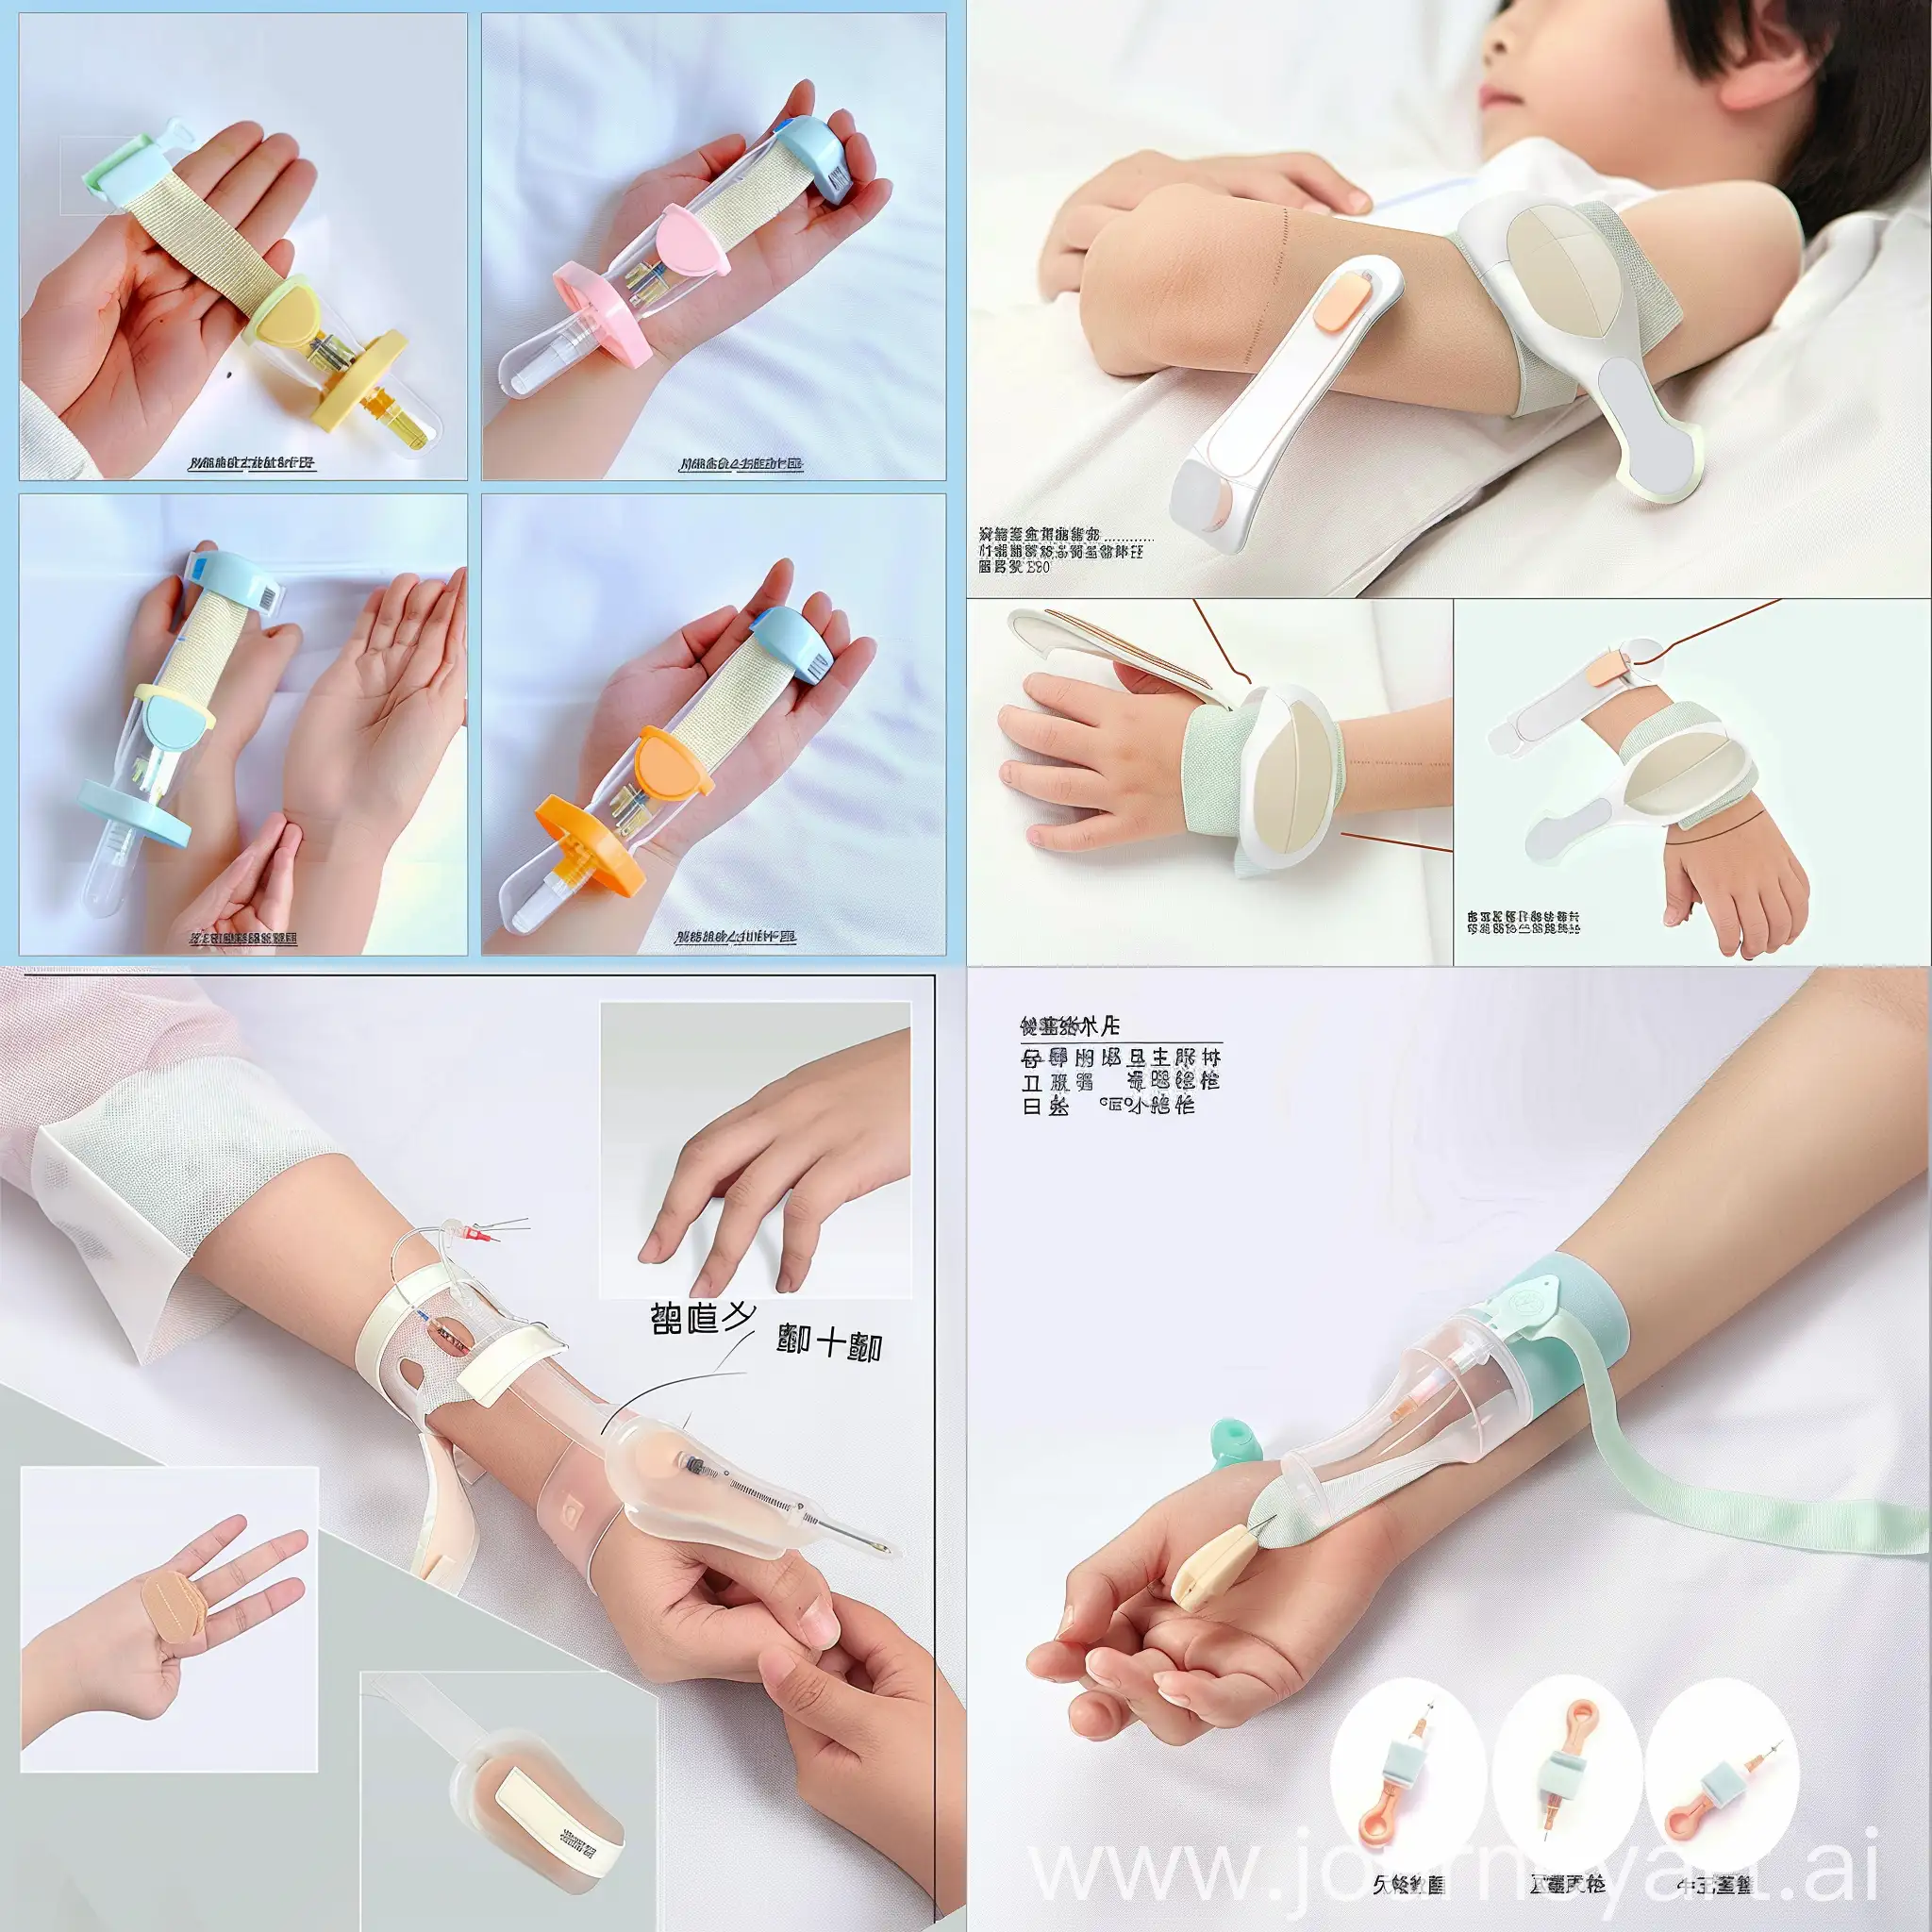 Interesting infusion fixator, designed into the shape of two slender strap, can fix the infusion tube on the wrist, while changing the length of the strap according to the size of the child's wrist, to solve the problem of children moving needles out of the infusion, but also to solve the problem of ordinary tape easy to fall off after sweating, the skin becomes itchy element extraction, do not be too specific product design hand-drawn, Sketch scheme, product design, white background, lovely simplicity, reusable, element extraction, not too specific, a little abstract